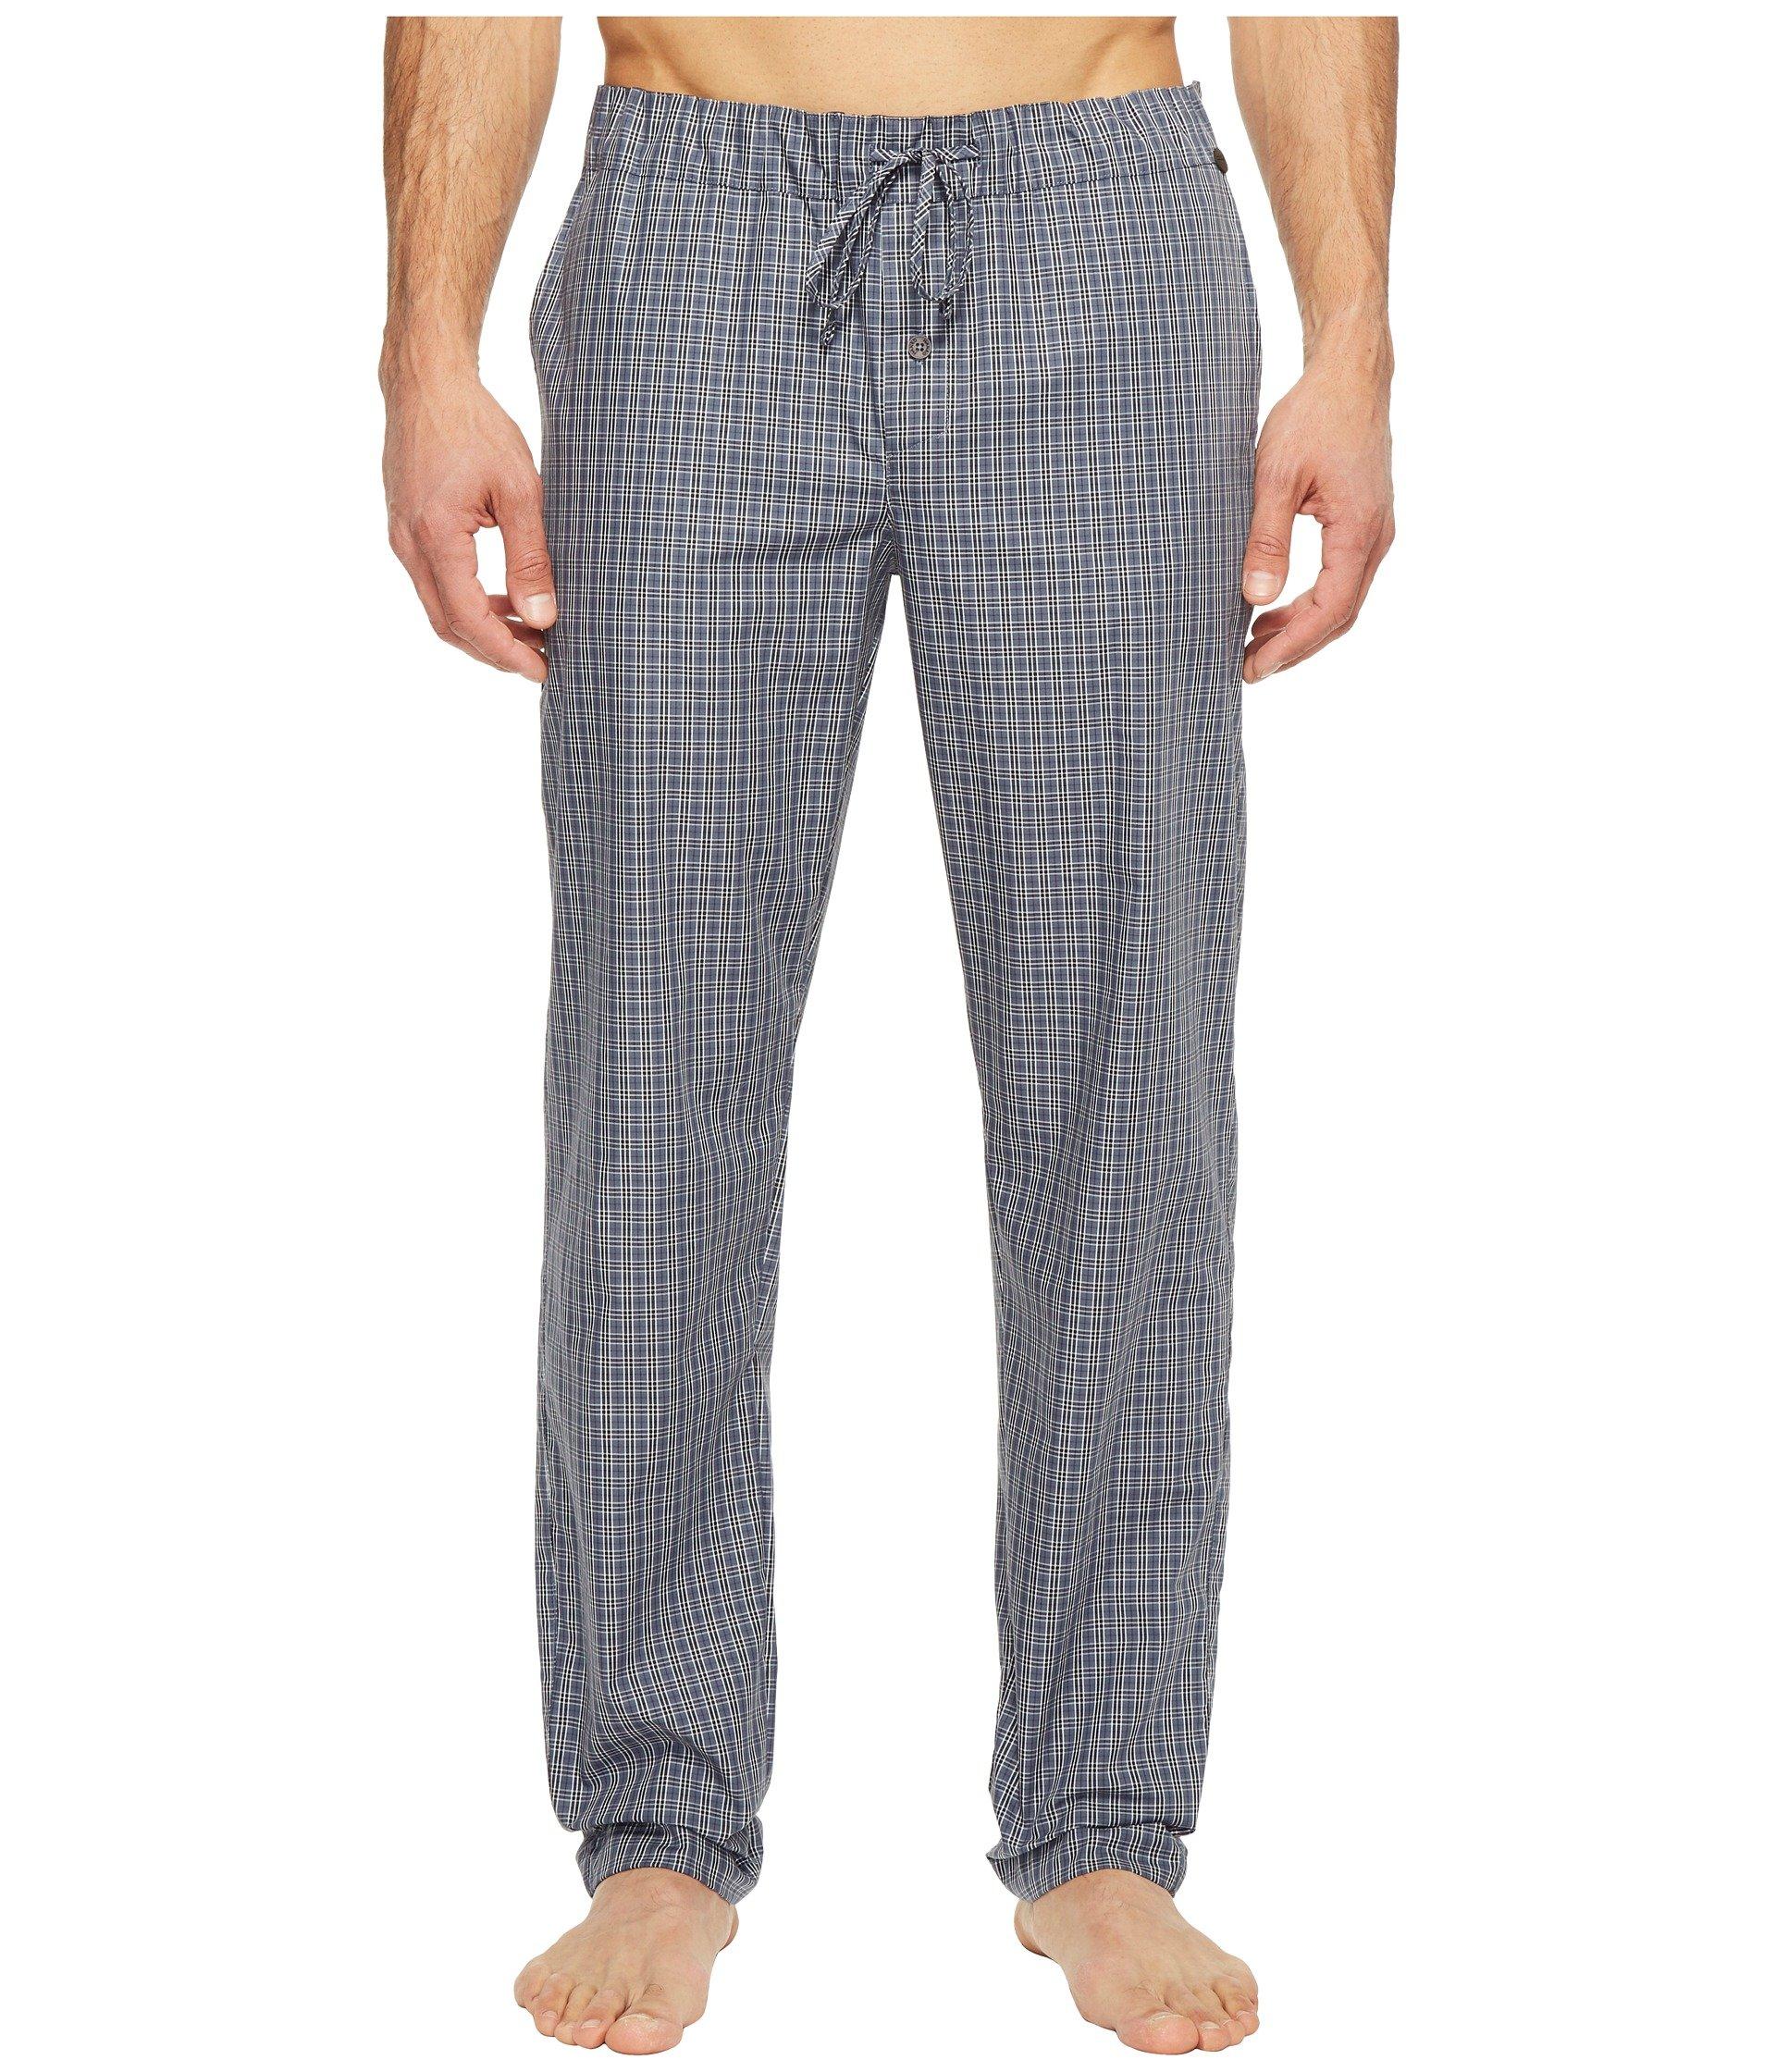 Hanro Cotton Night And Day Woven Lounge Pants in Black for Men - Lyst